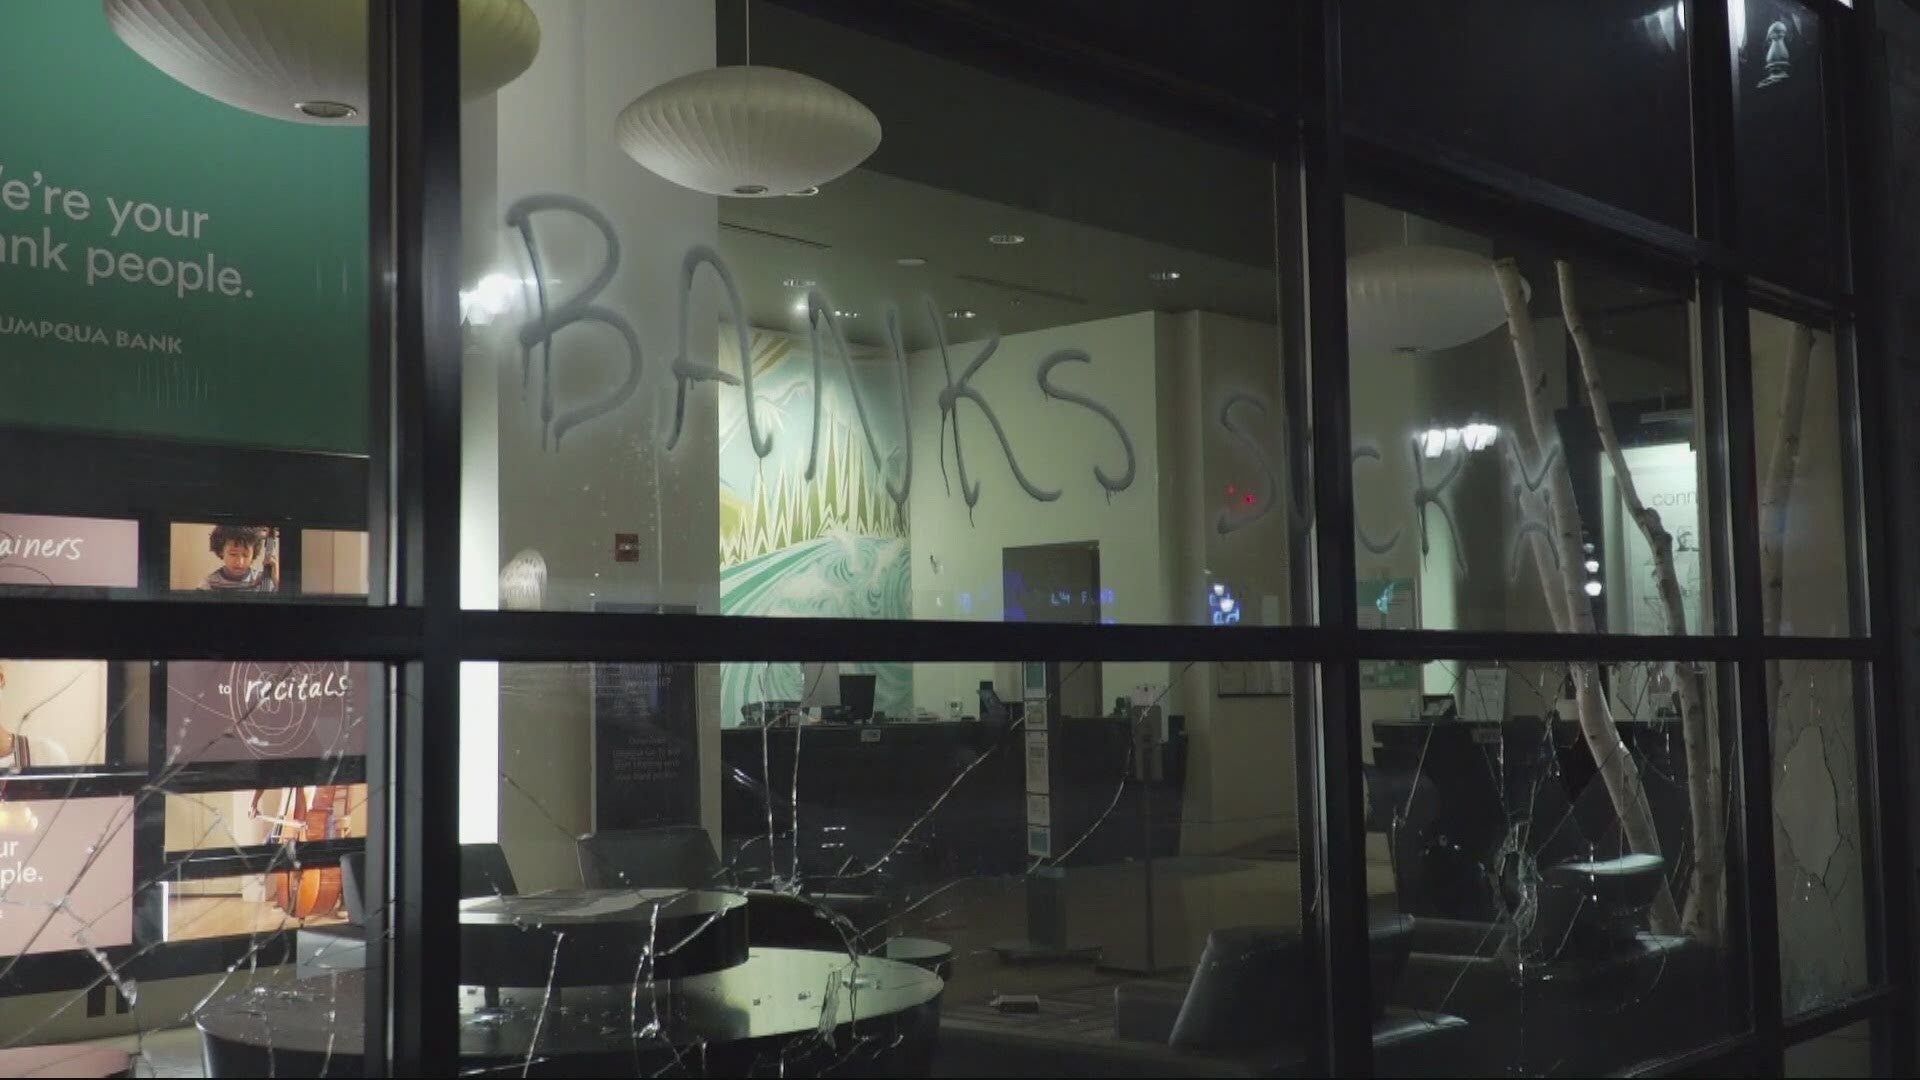 This week the Portland City Council will consider new rules to help people better protect their businesses from vandalism and damage. Tim Gordon reports.